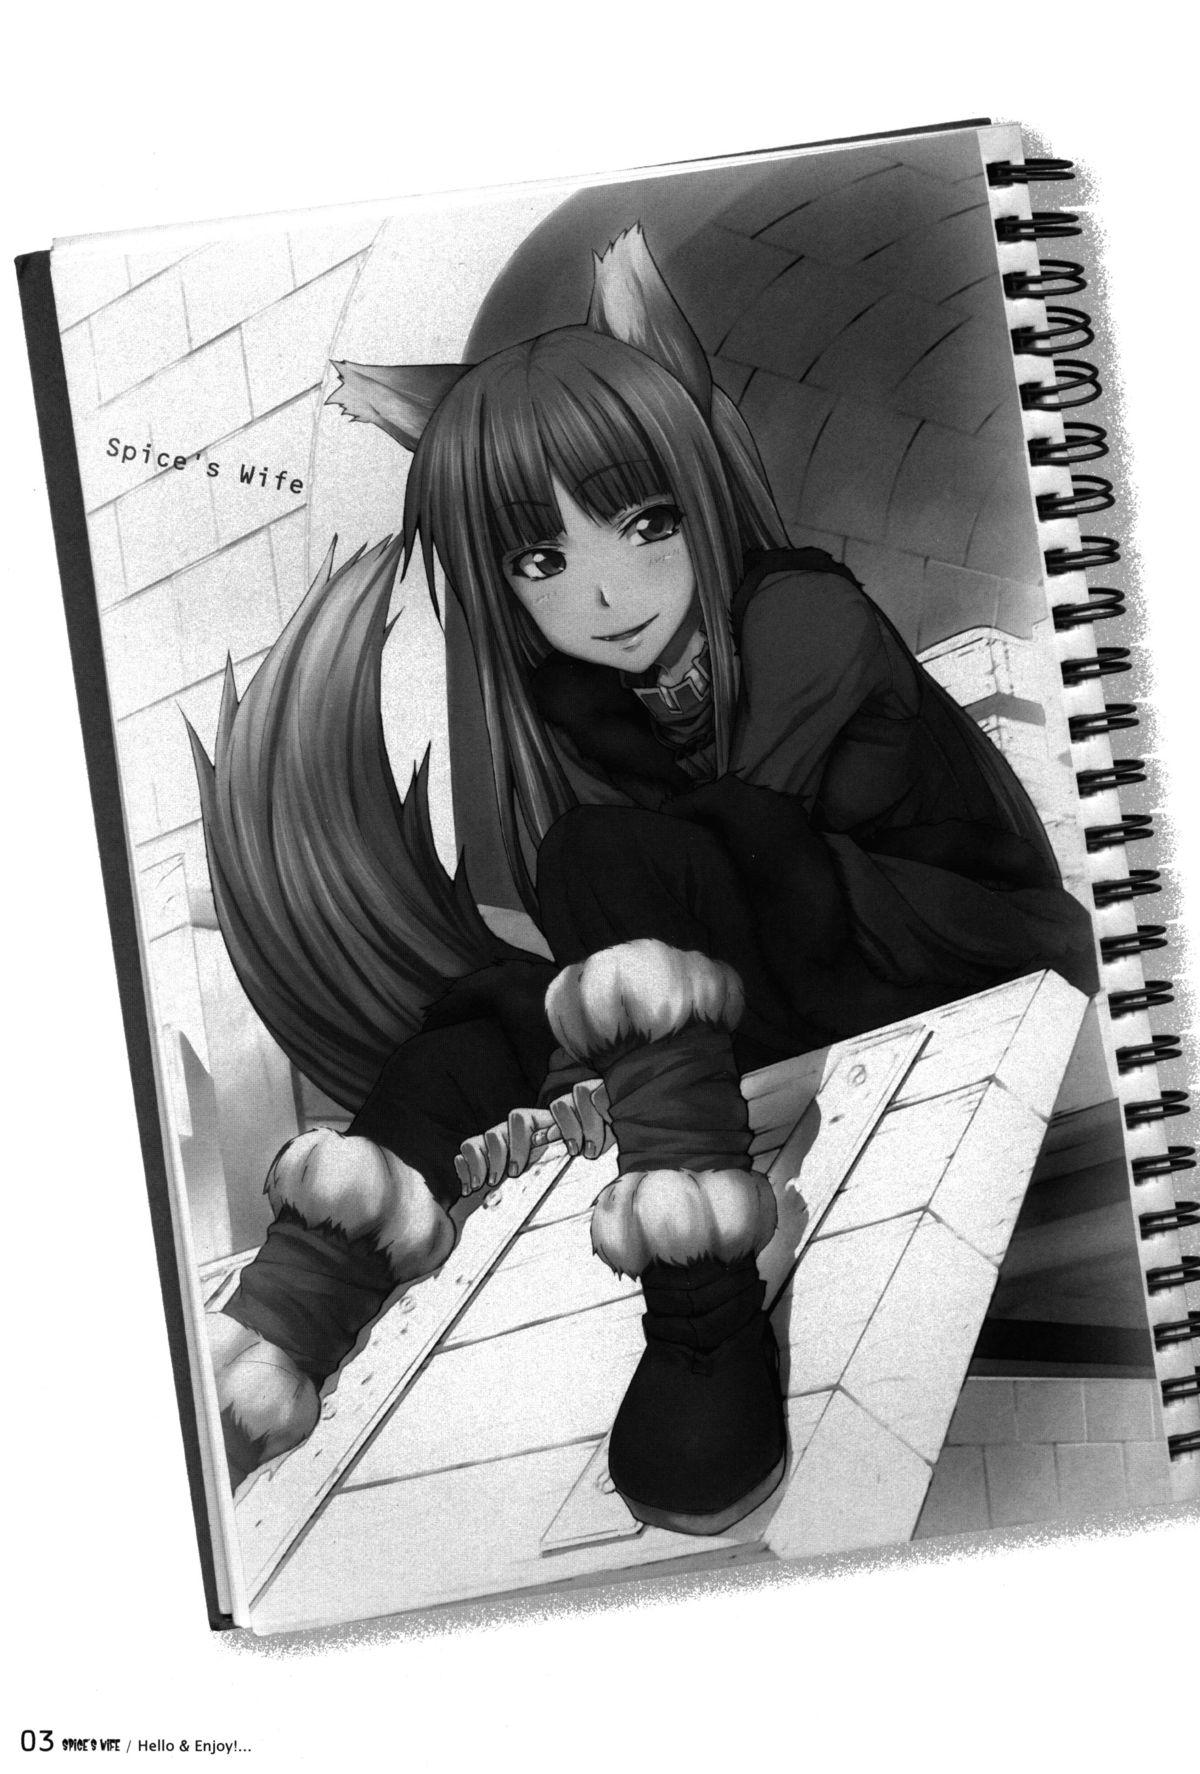 Hood SPiCE'S WiFE - Spice and wolf Coed - Page 3